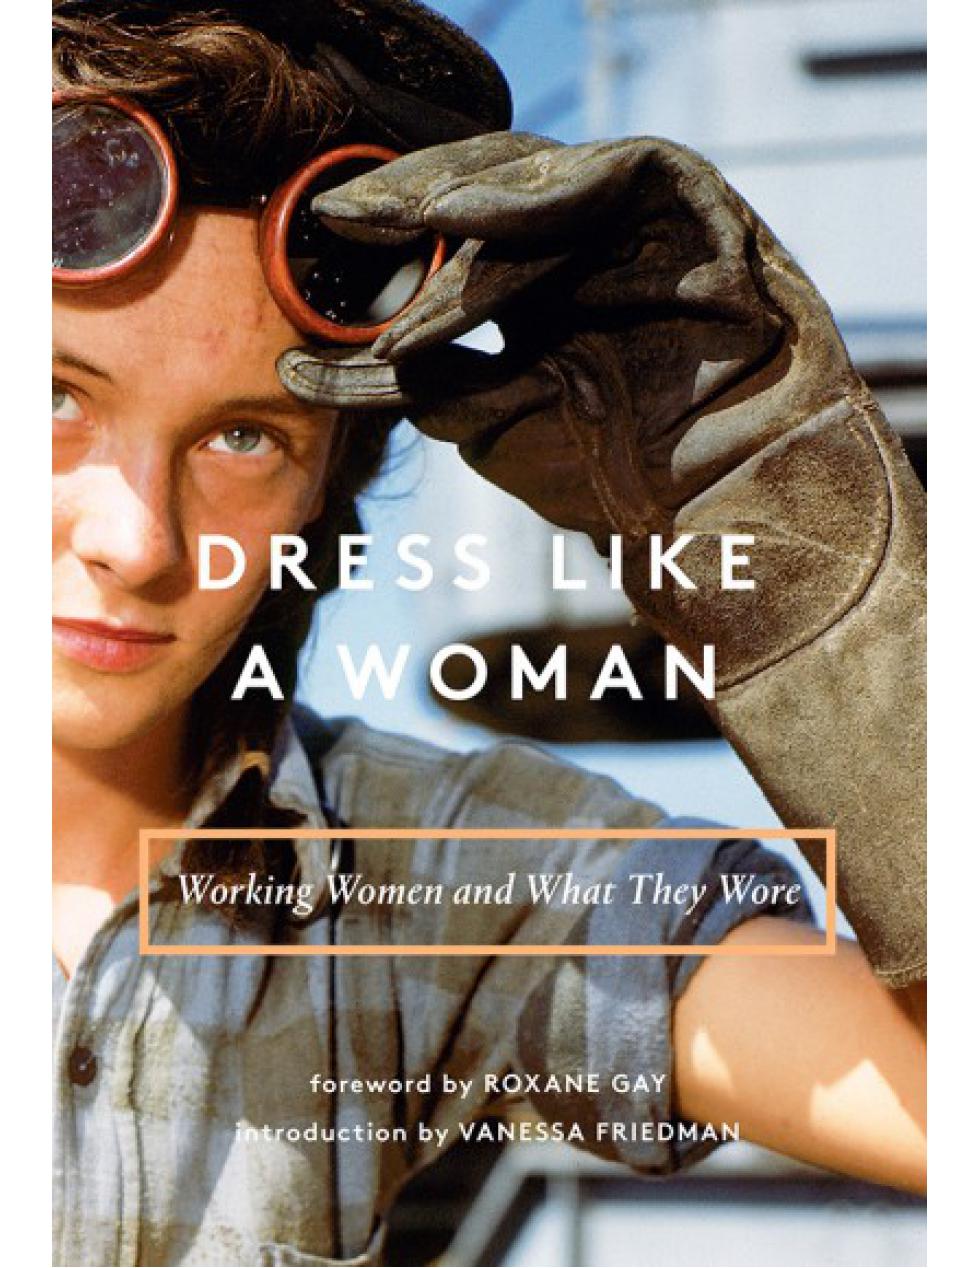 Book : DRESS LIKE A WOMAN, Working Women and What They Wore